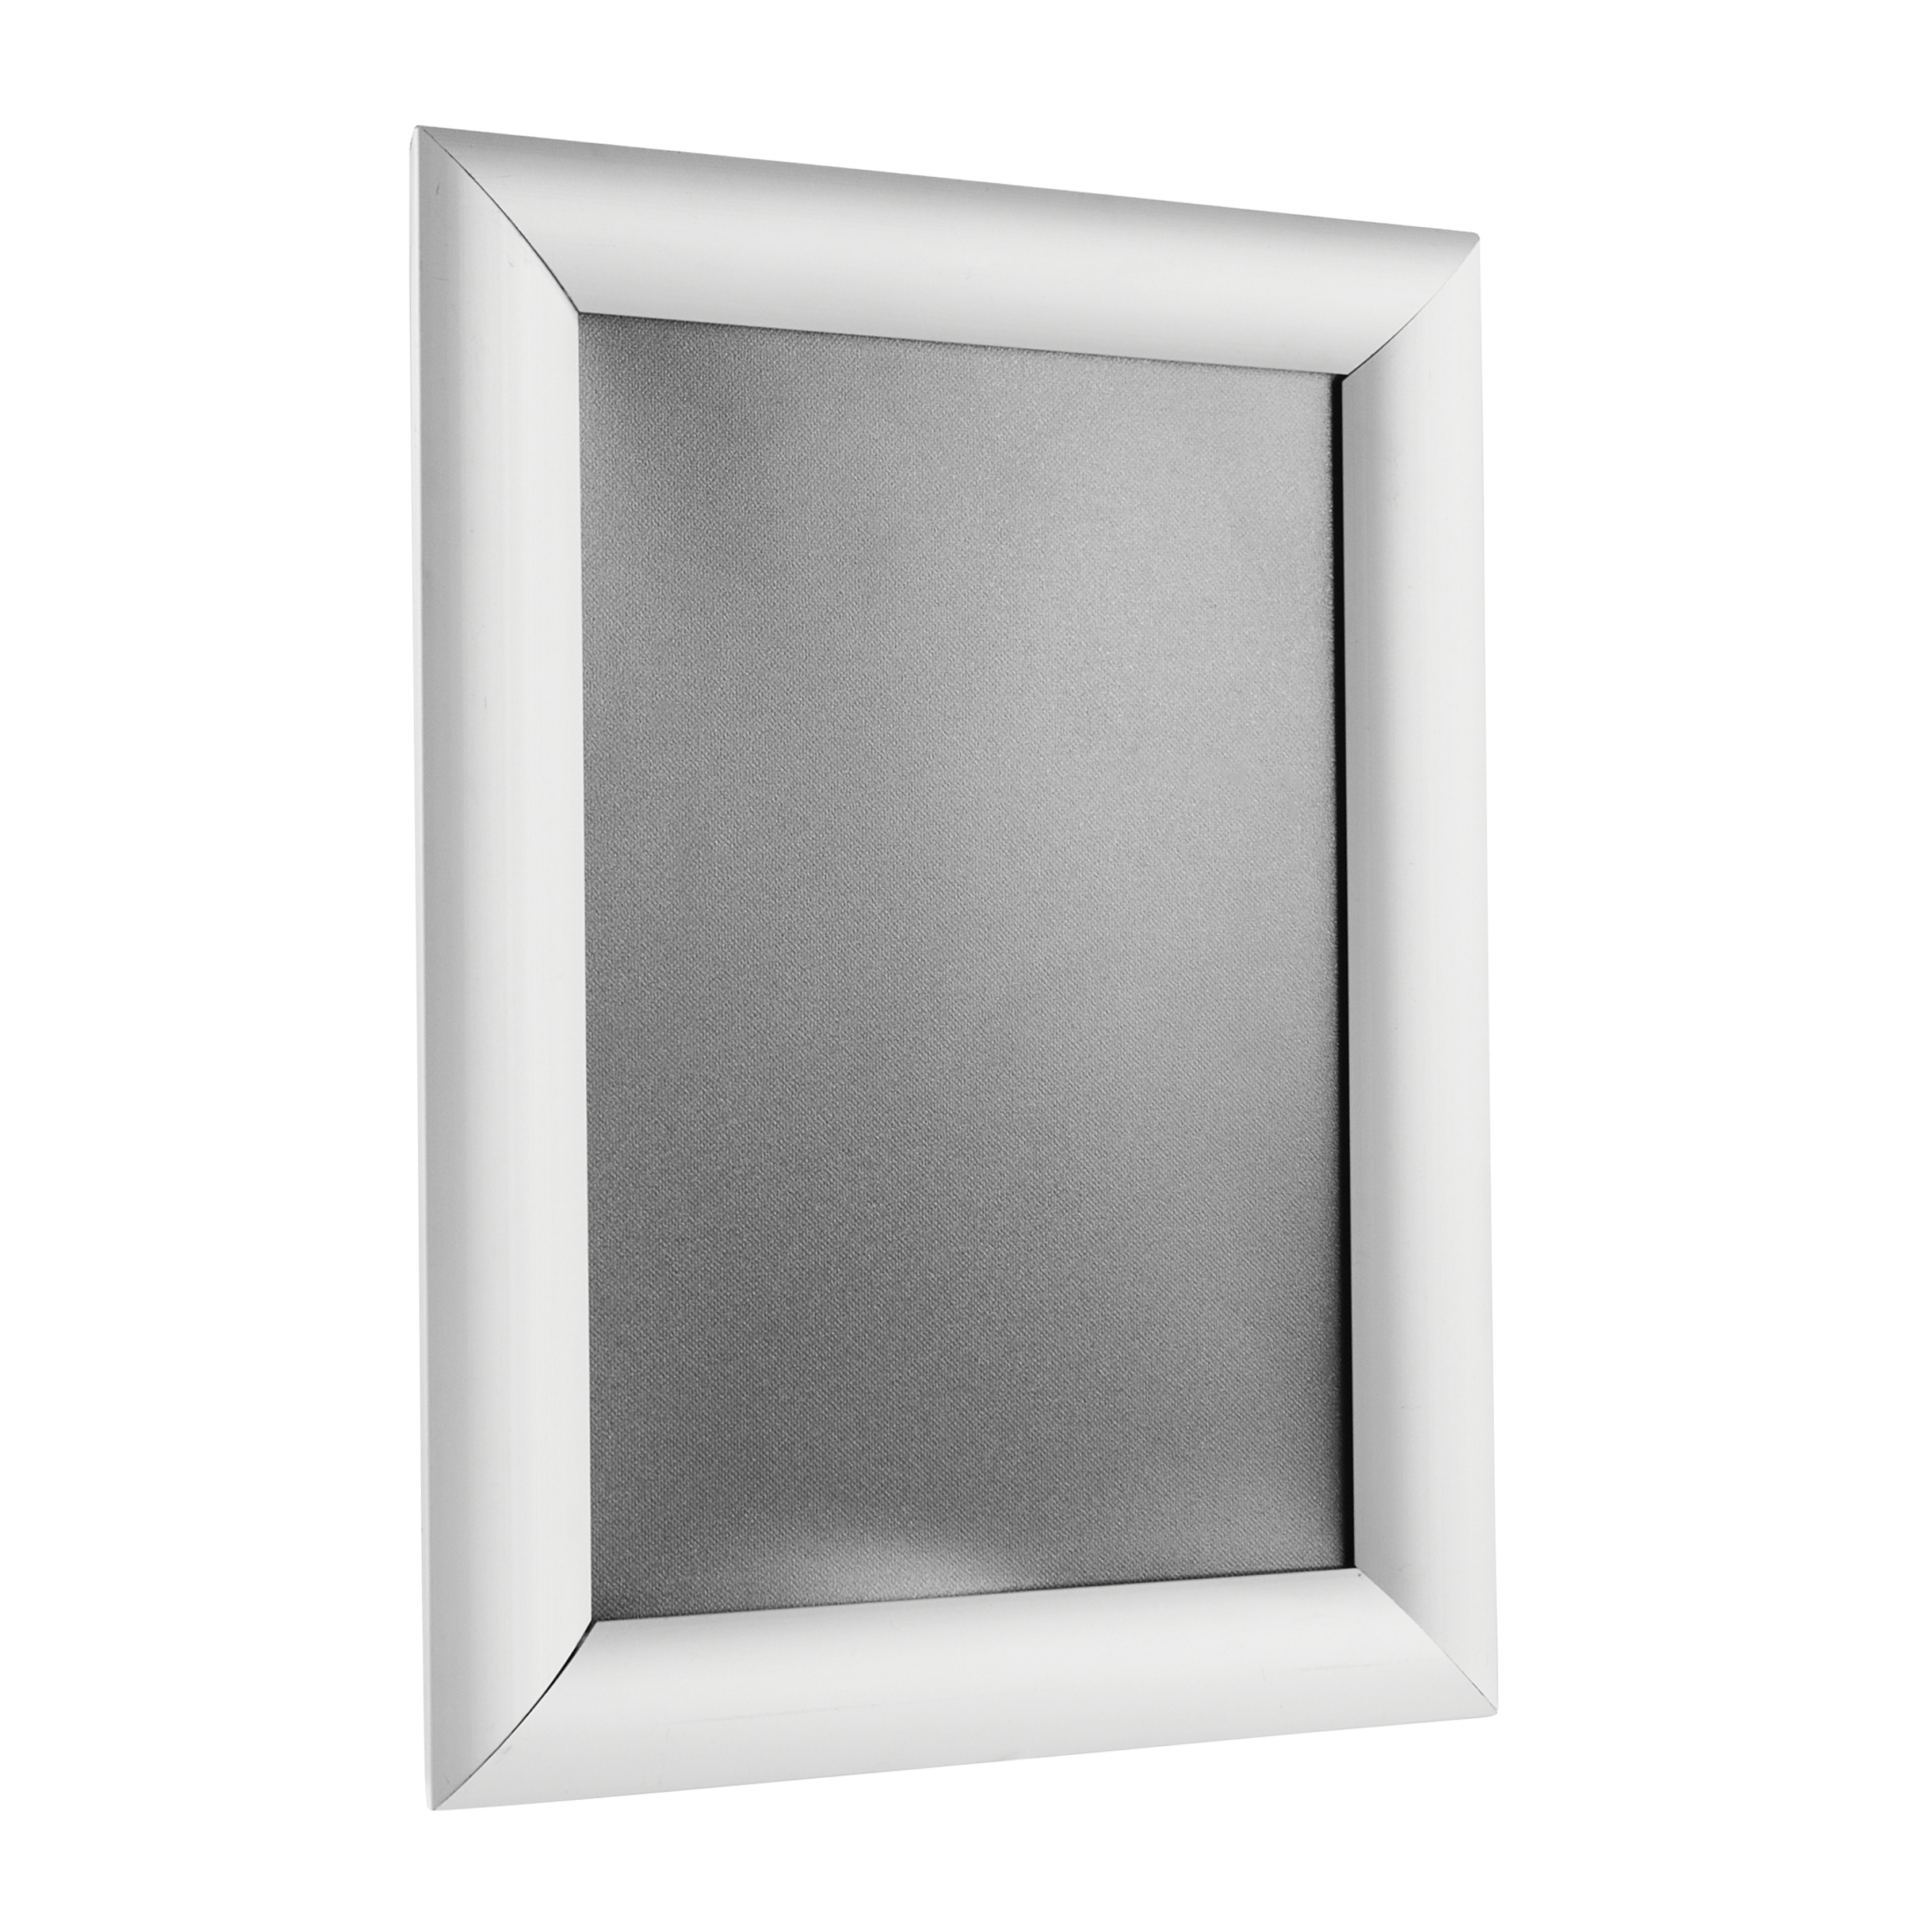 Snap Frame, 25 mm profile, silver anodised, A1